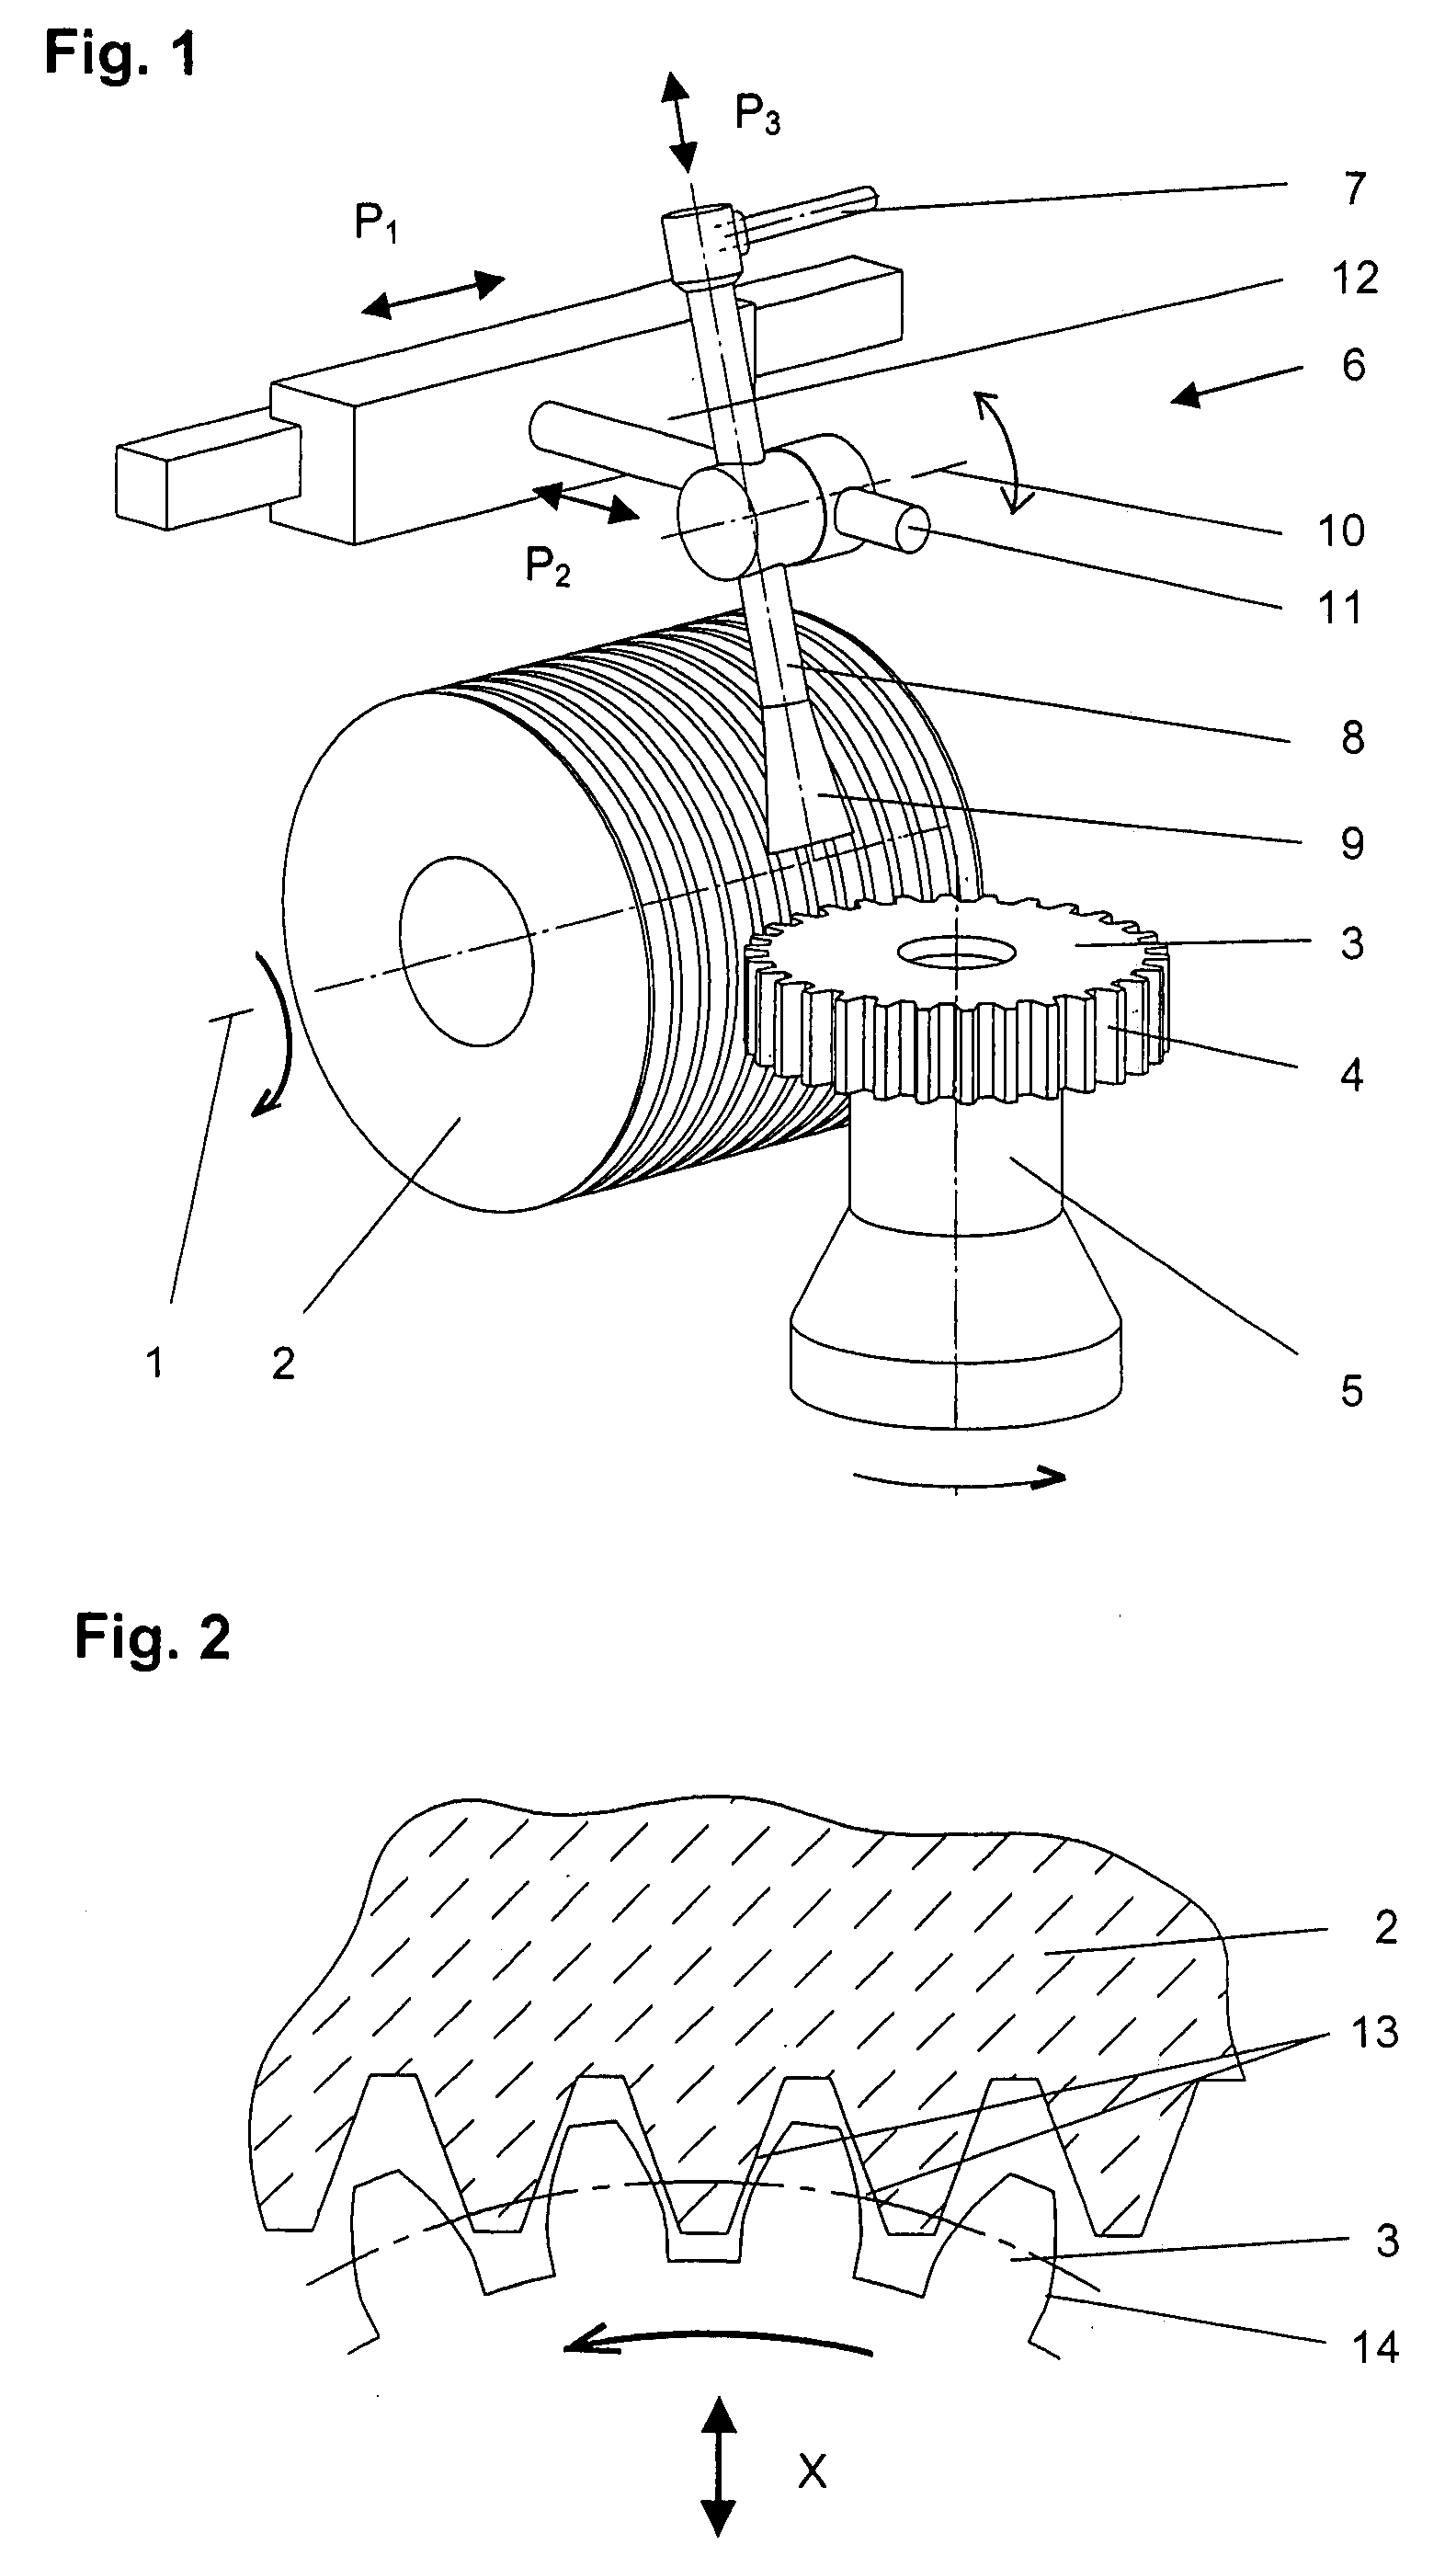 Process for monitoring the setting of the coolant nozzle of a grinding machine